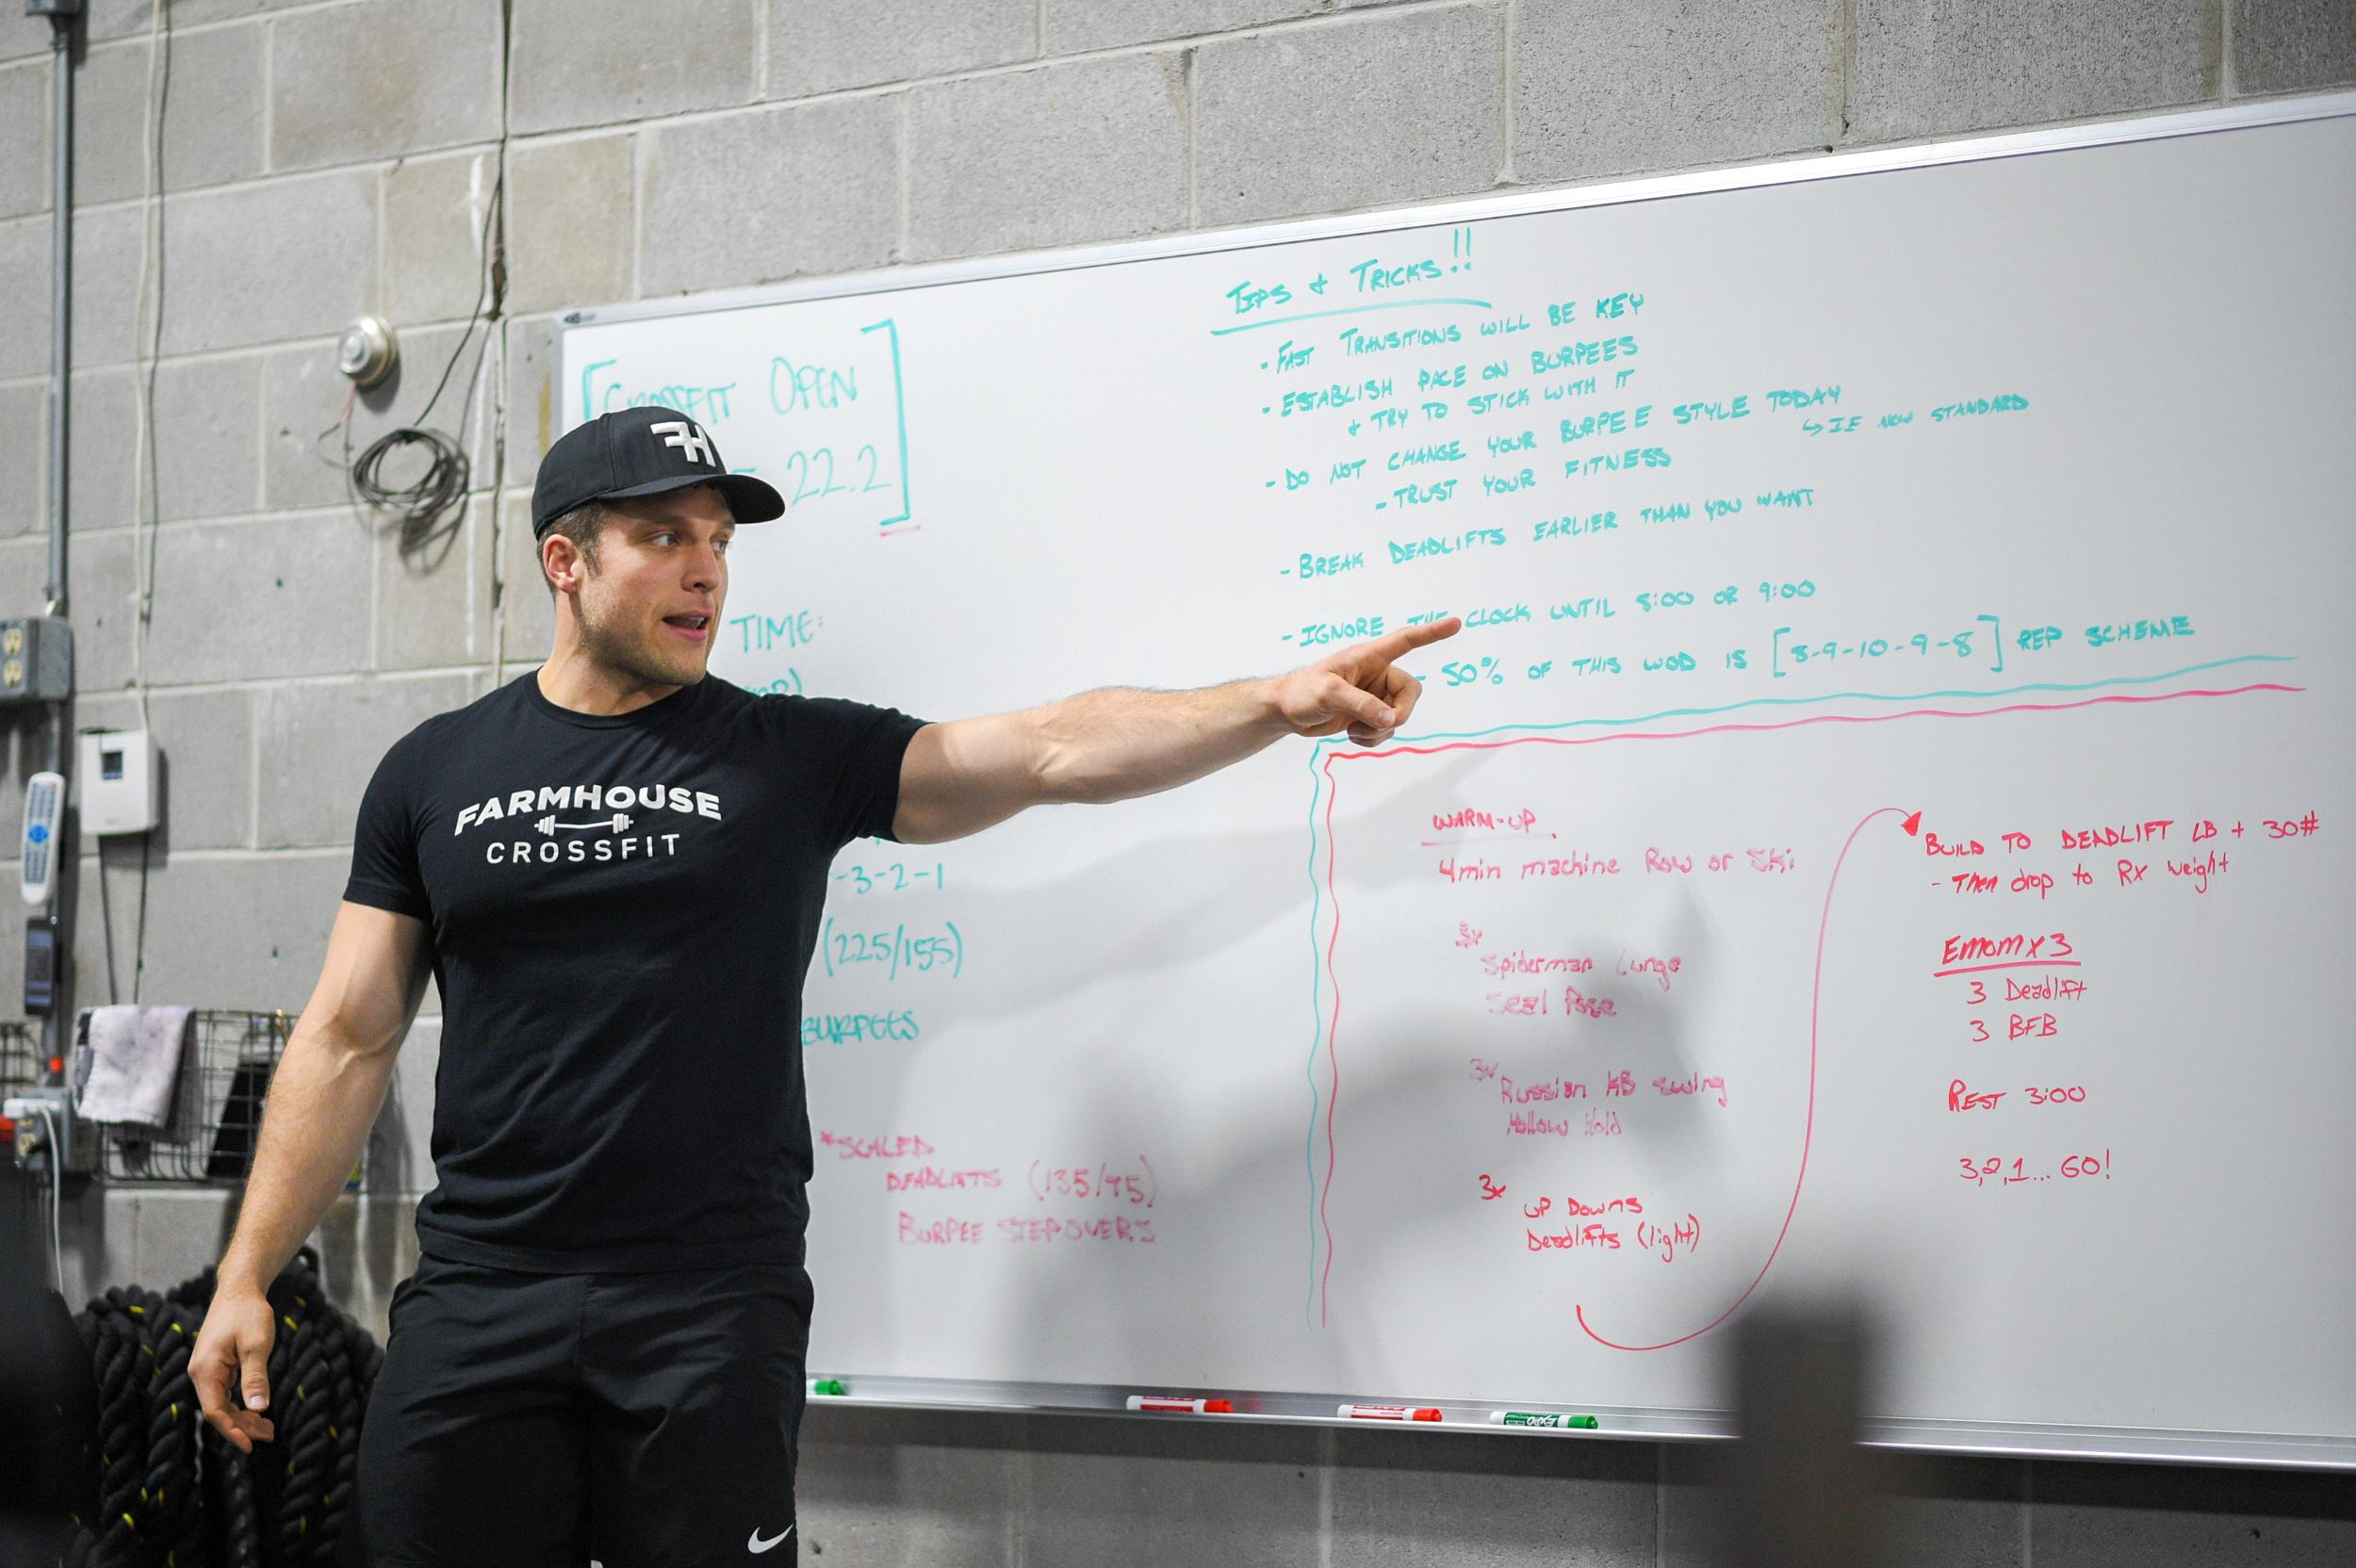 A coach points to the whiteboard.